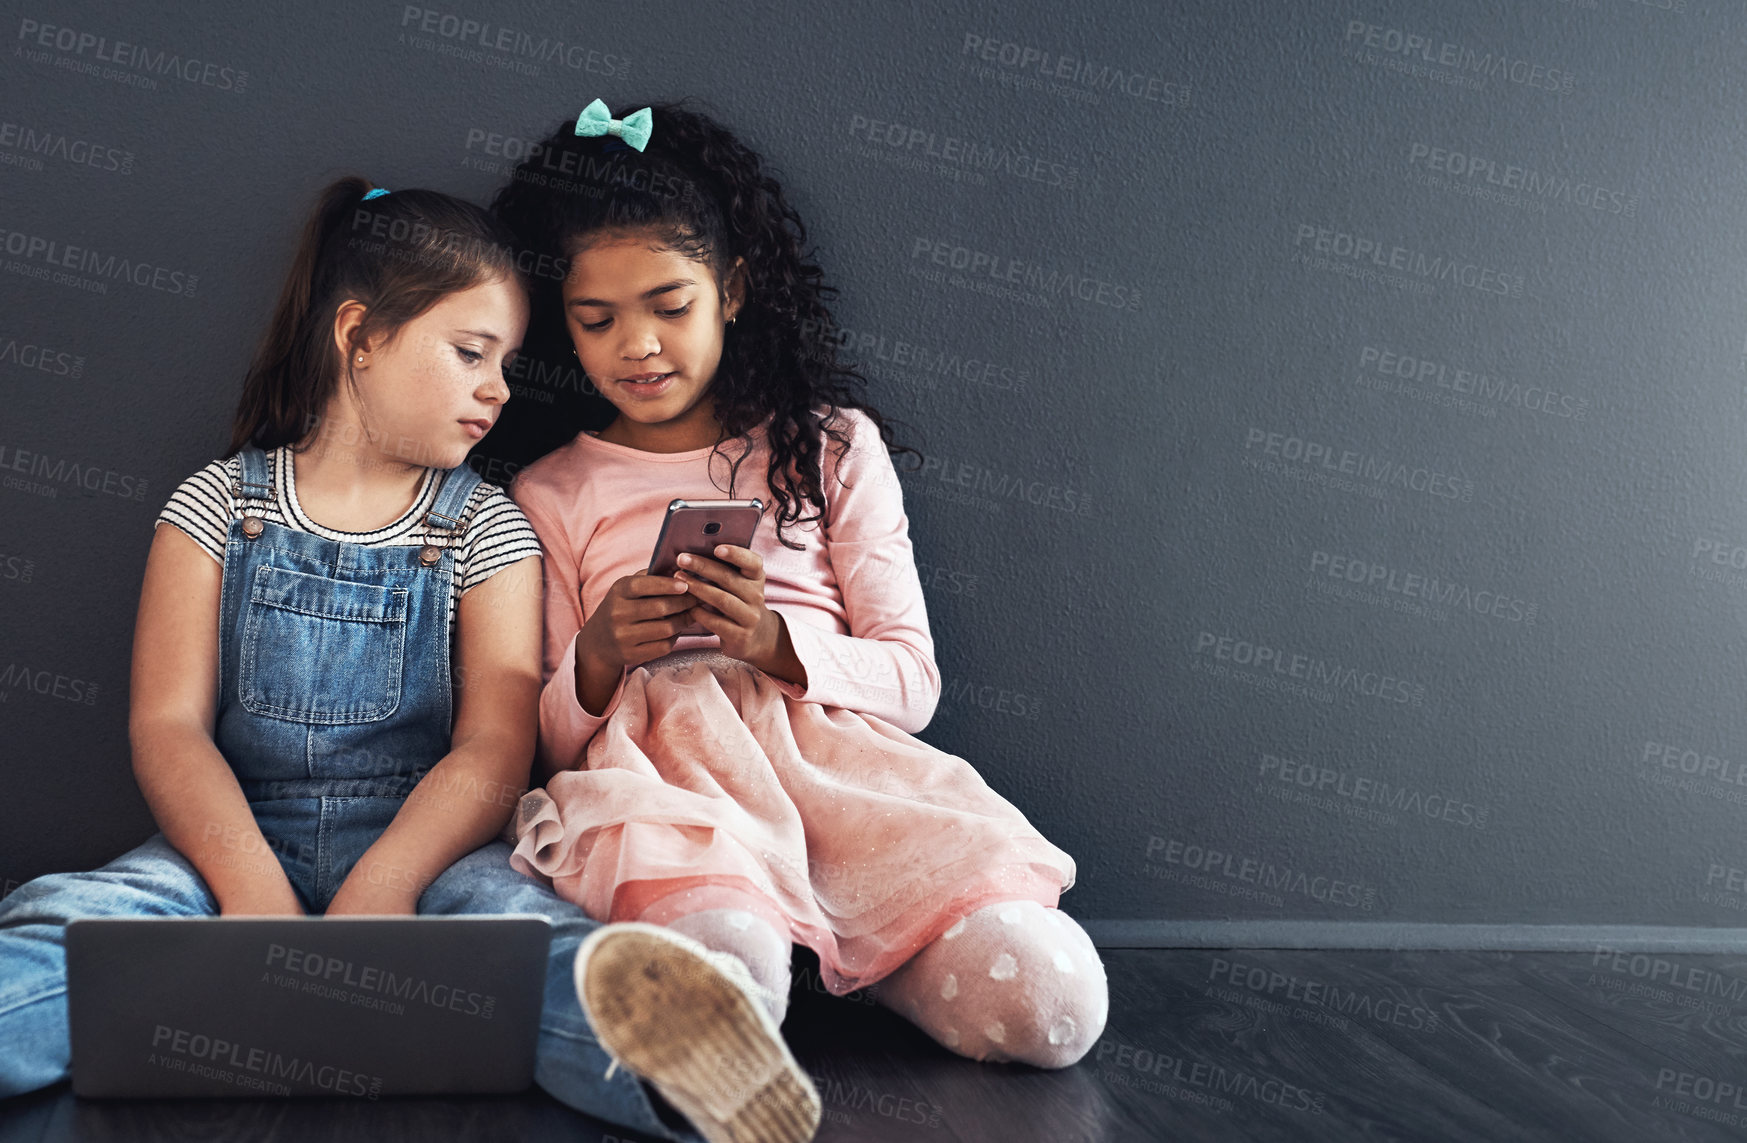 Buy stock photo Studio shot of two young girls sitting on the floor and using wireless technology against a gray background